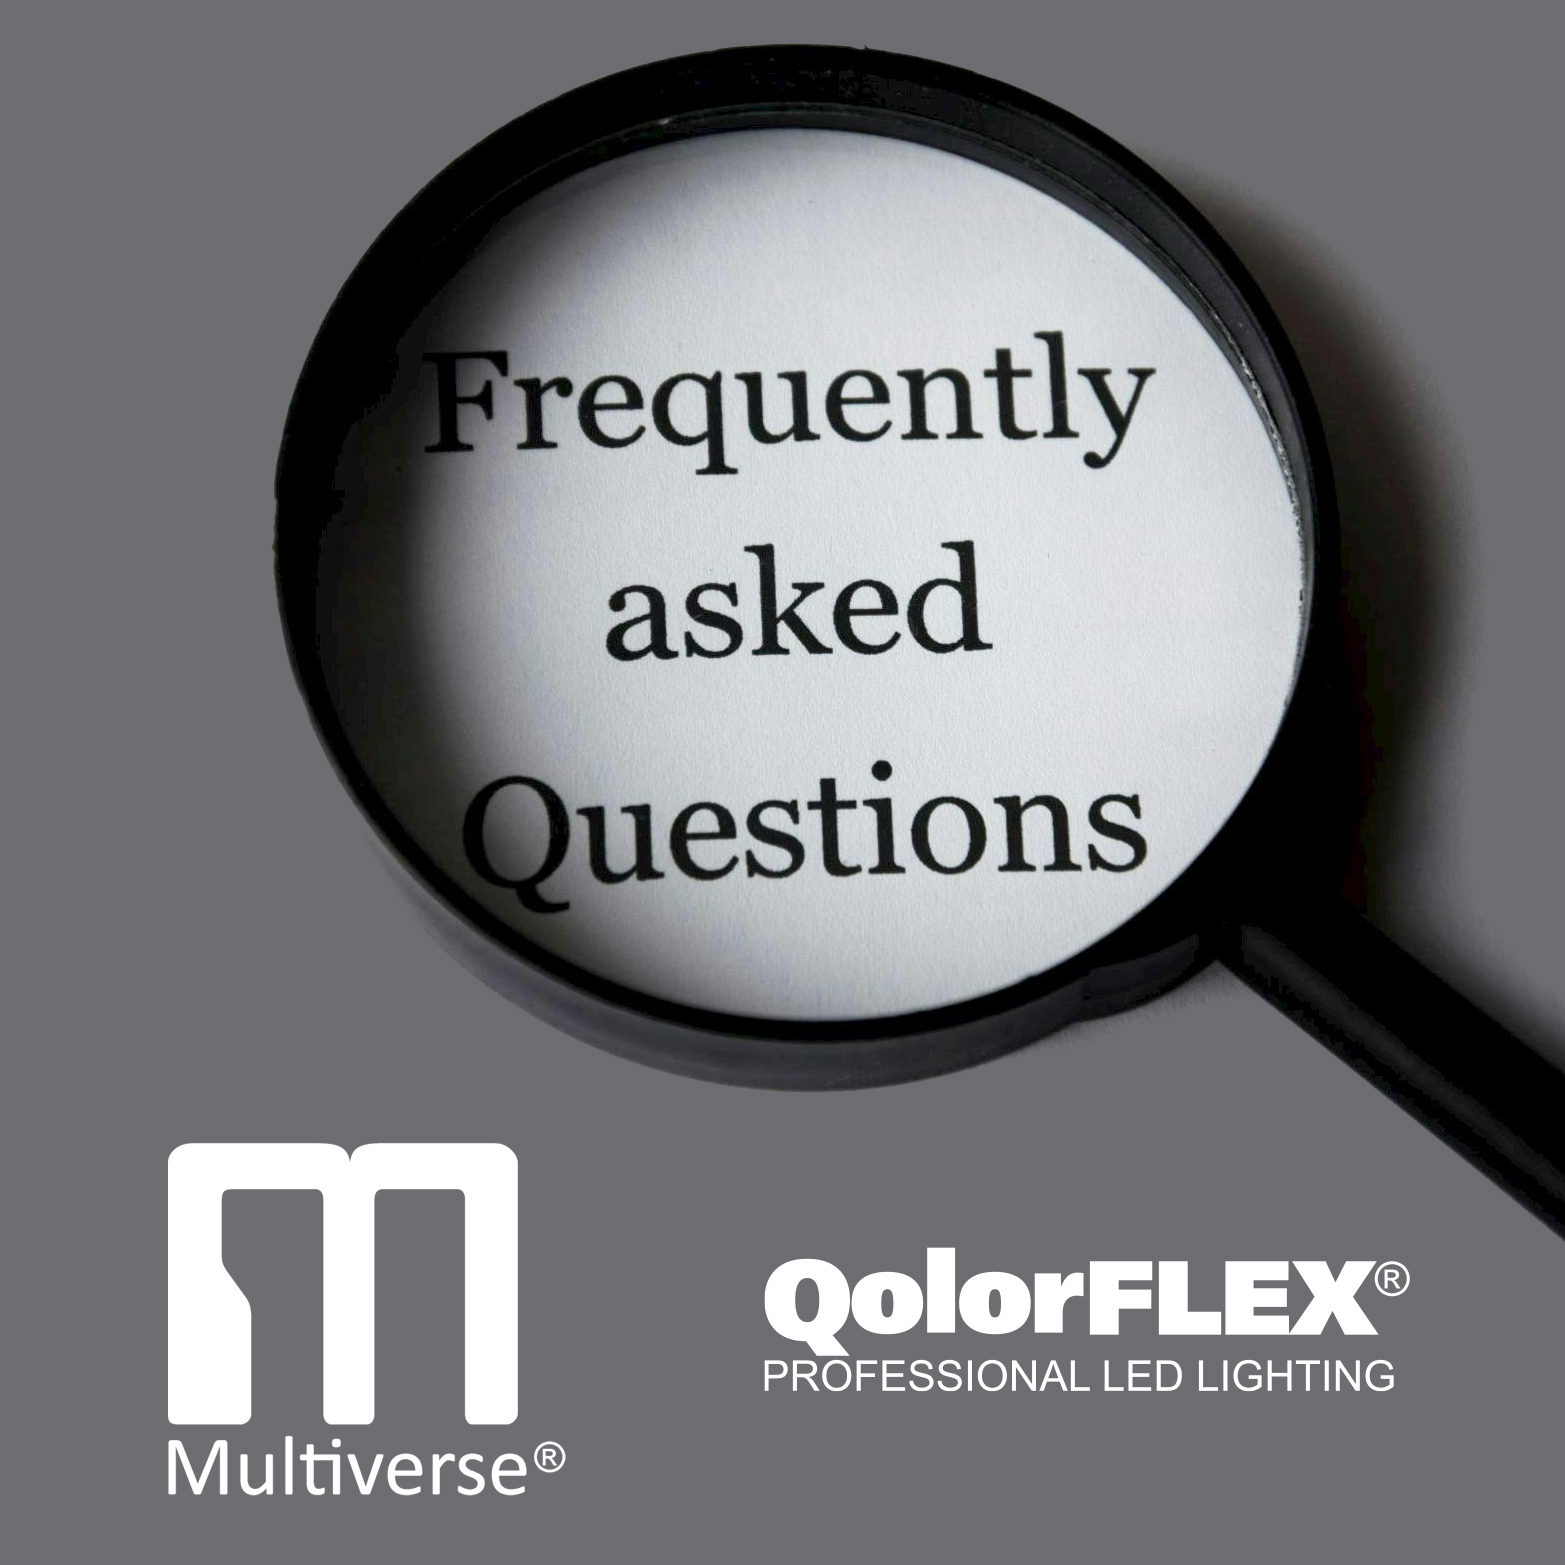 FAQs on Multiverse and QolorFLEX products